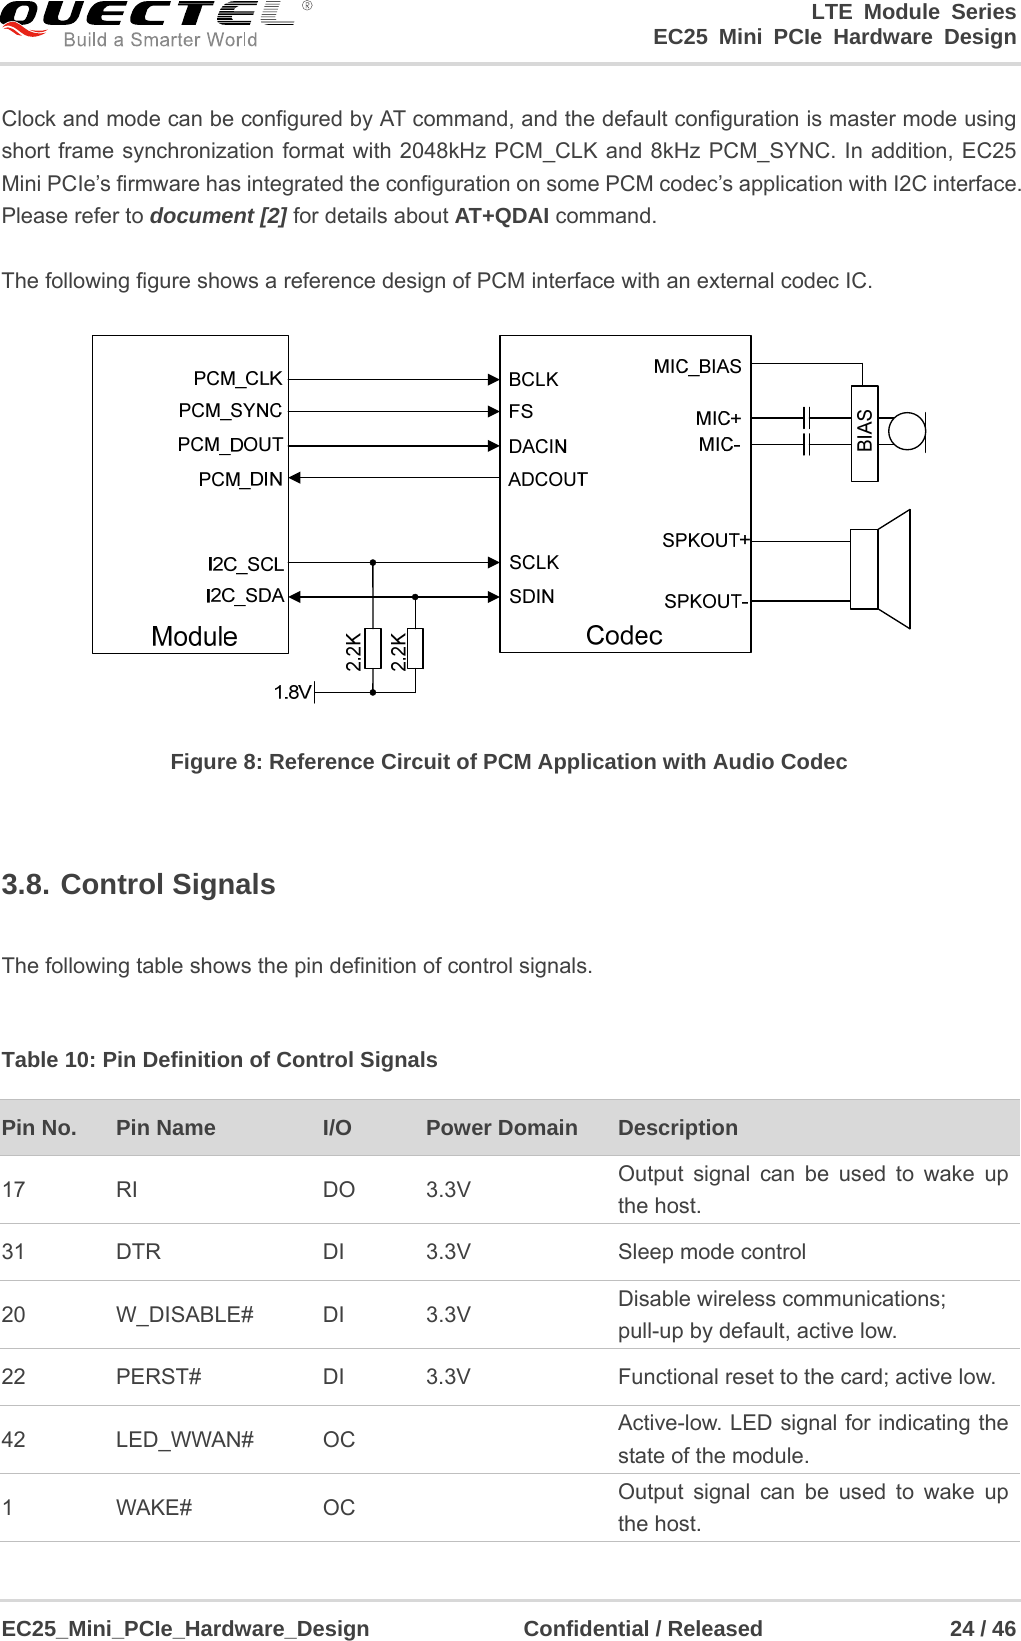                                        LTE Module Series                                                  EC25 Mini PCIe Hardware Design  EC25_Mini_PCIe_Hardware_Design              Confidential / Released                 24 / 46    Clock and mode can be configured by AT command, and the default configuration is master mode using short frame synchronization format with 2048kHz PCM_CLK and 8kHz PCM_SYNC. In addition, EC25 Mini PCIe’s firmware has integrated the configuration on some PCM codec’s application with I2C interface. Please refer to document [2] for details about AT+QDAI command.  The following figure shows a reference design of PCM interface with an external codec IC.  Figure 8: Reference Circuit of PCM Application with Audio Codec  3.8. Control Signals  The following table shows the pin definition of control signals.  Table 10: Pin Definition of Control Signals Pin No.  Pin Name  I/O  Power Domain    Description 17 RI  DO 3.3V  Output signal can be used to wake up the host. 31 DTR  DI 3.3V  Sleep mode control 20  W_DISABLE#  DI        3.3V  Disable wireless communications; pull-up by default, active low. 22  PERST#  DI        3.3V Functional reset to the card; active low. 42  LED_WWAN#  OC        Active-low. LED signal for indicating the state of the module. 1 WAKE#  OC  Output signal can be used to wake up the host. 